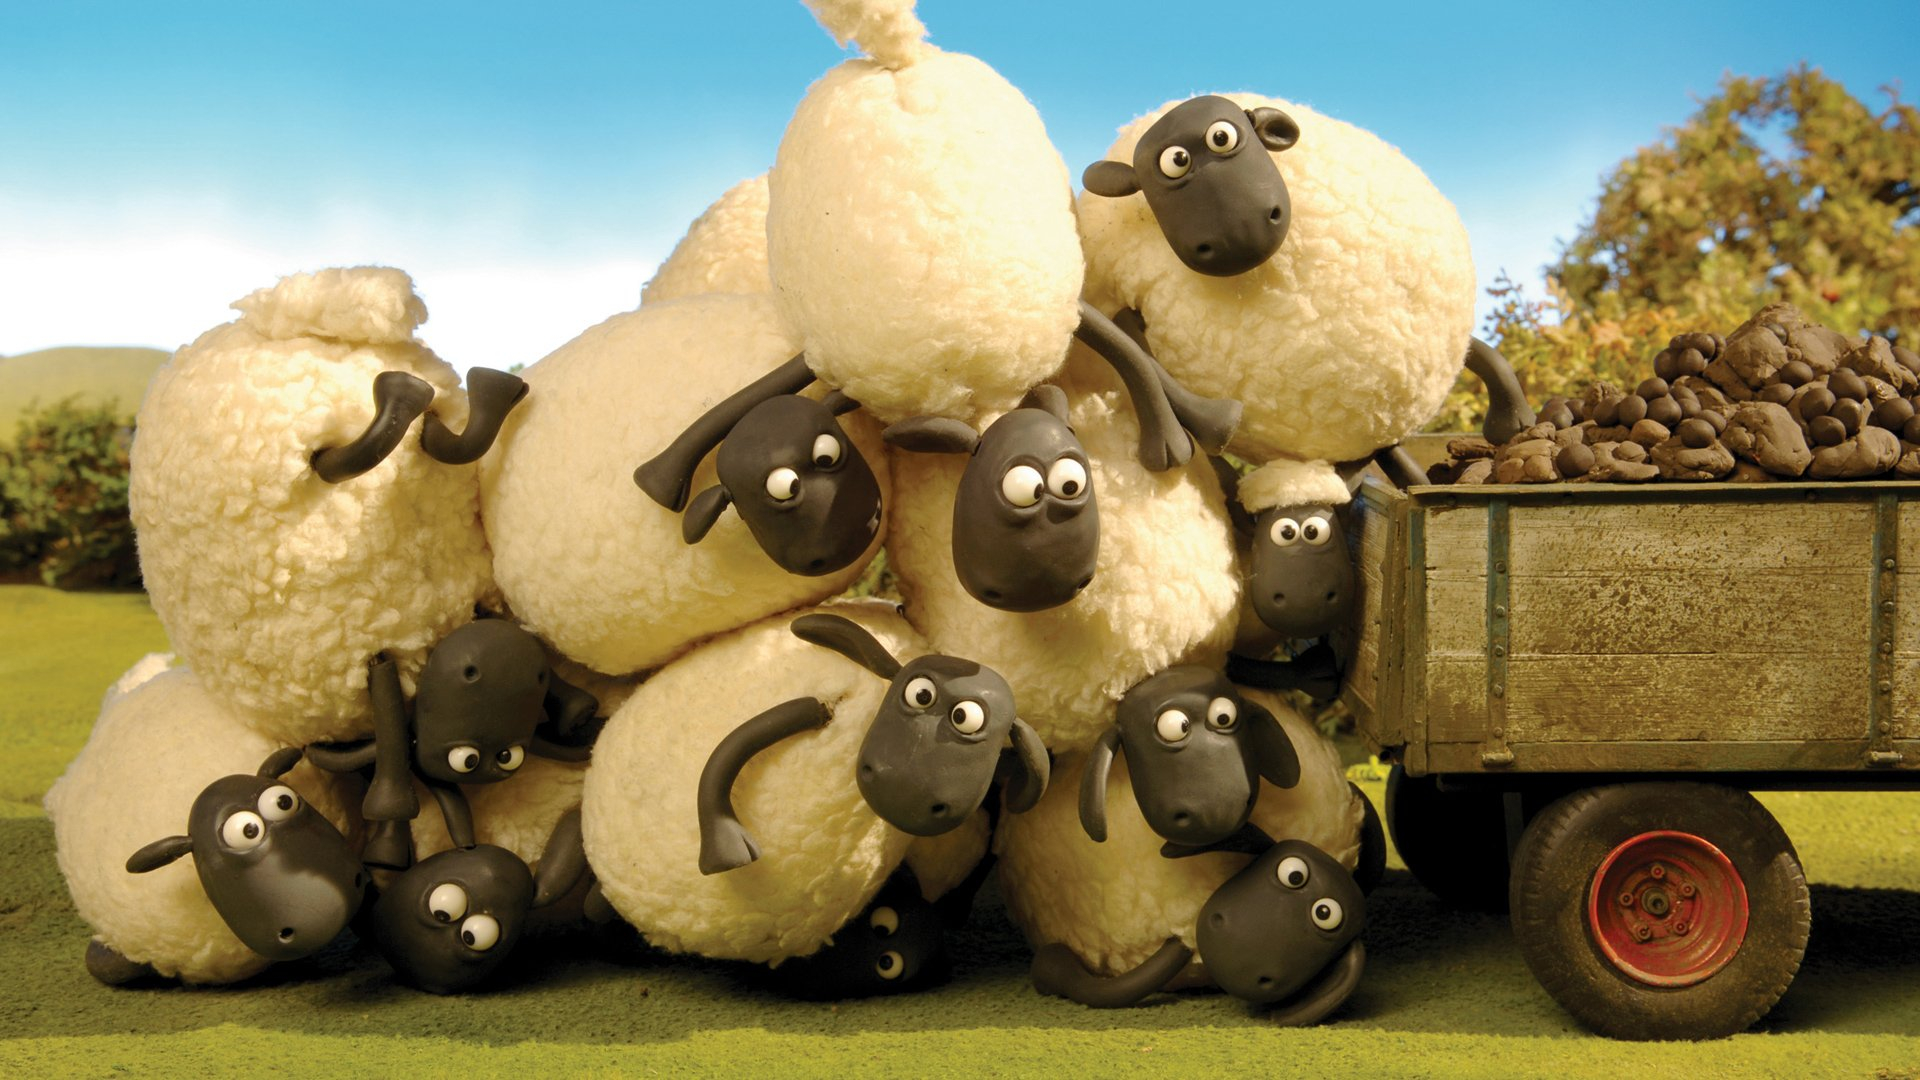 1920x1080 shaun the sheep, Animation, Family, Comedy, Shaun, Sheep, Adventure Wallpapers HD / Desktop and Mobile Backgrounds